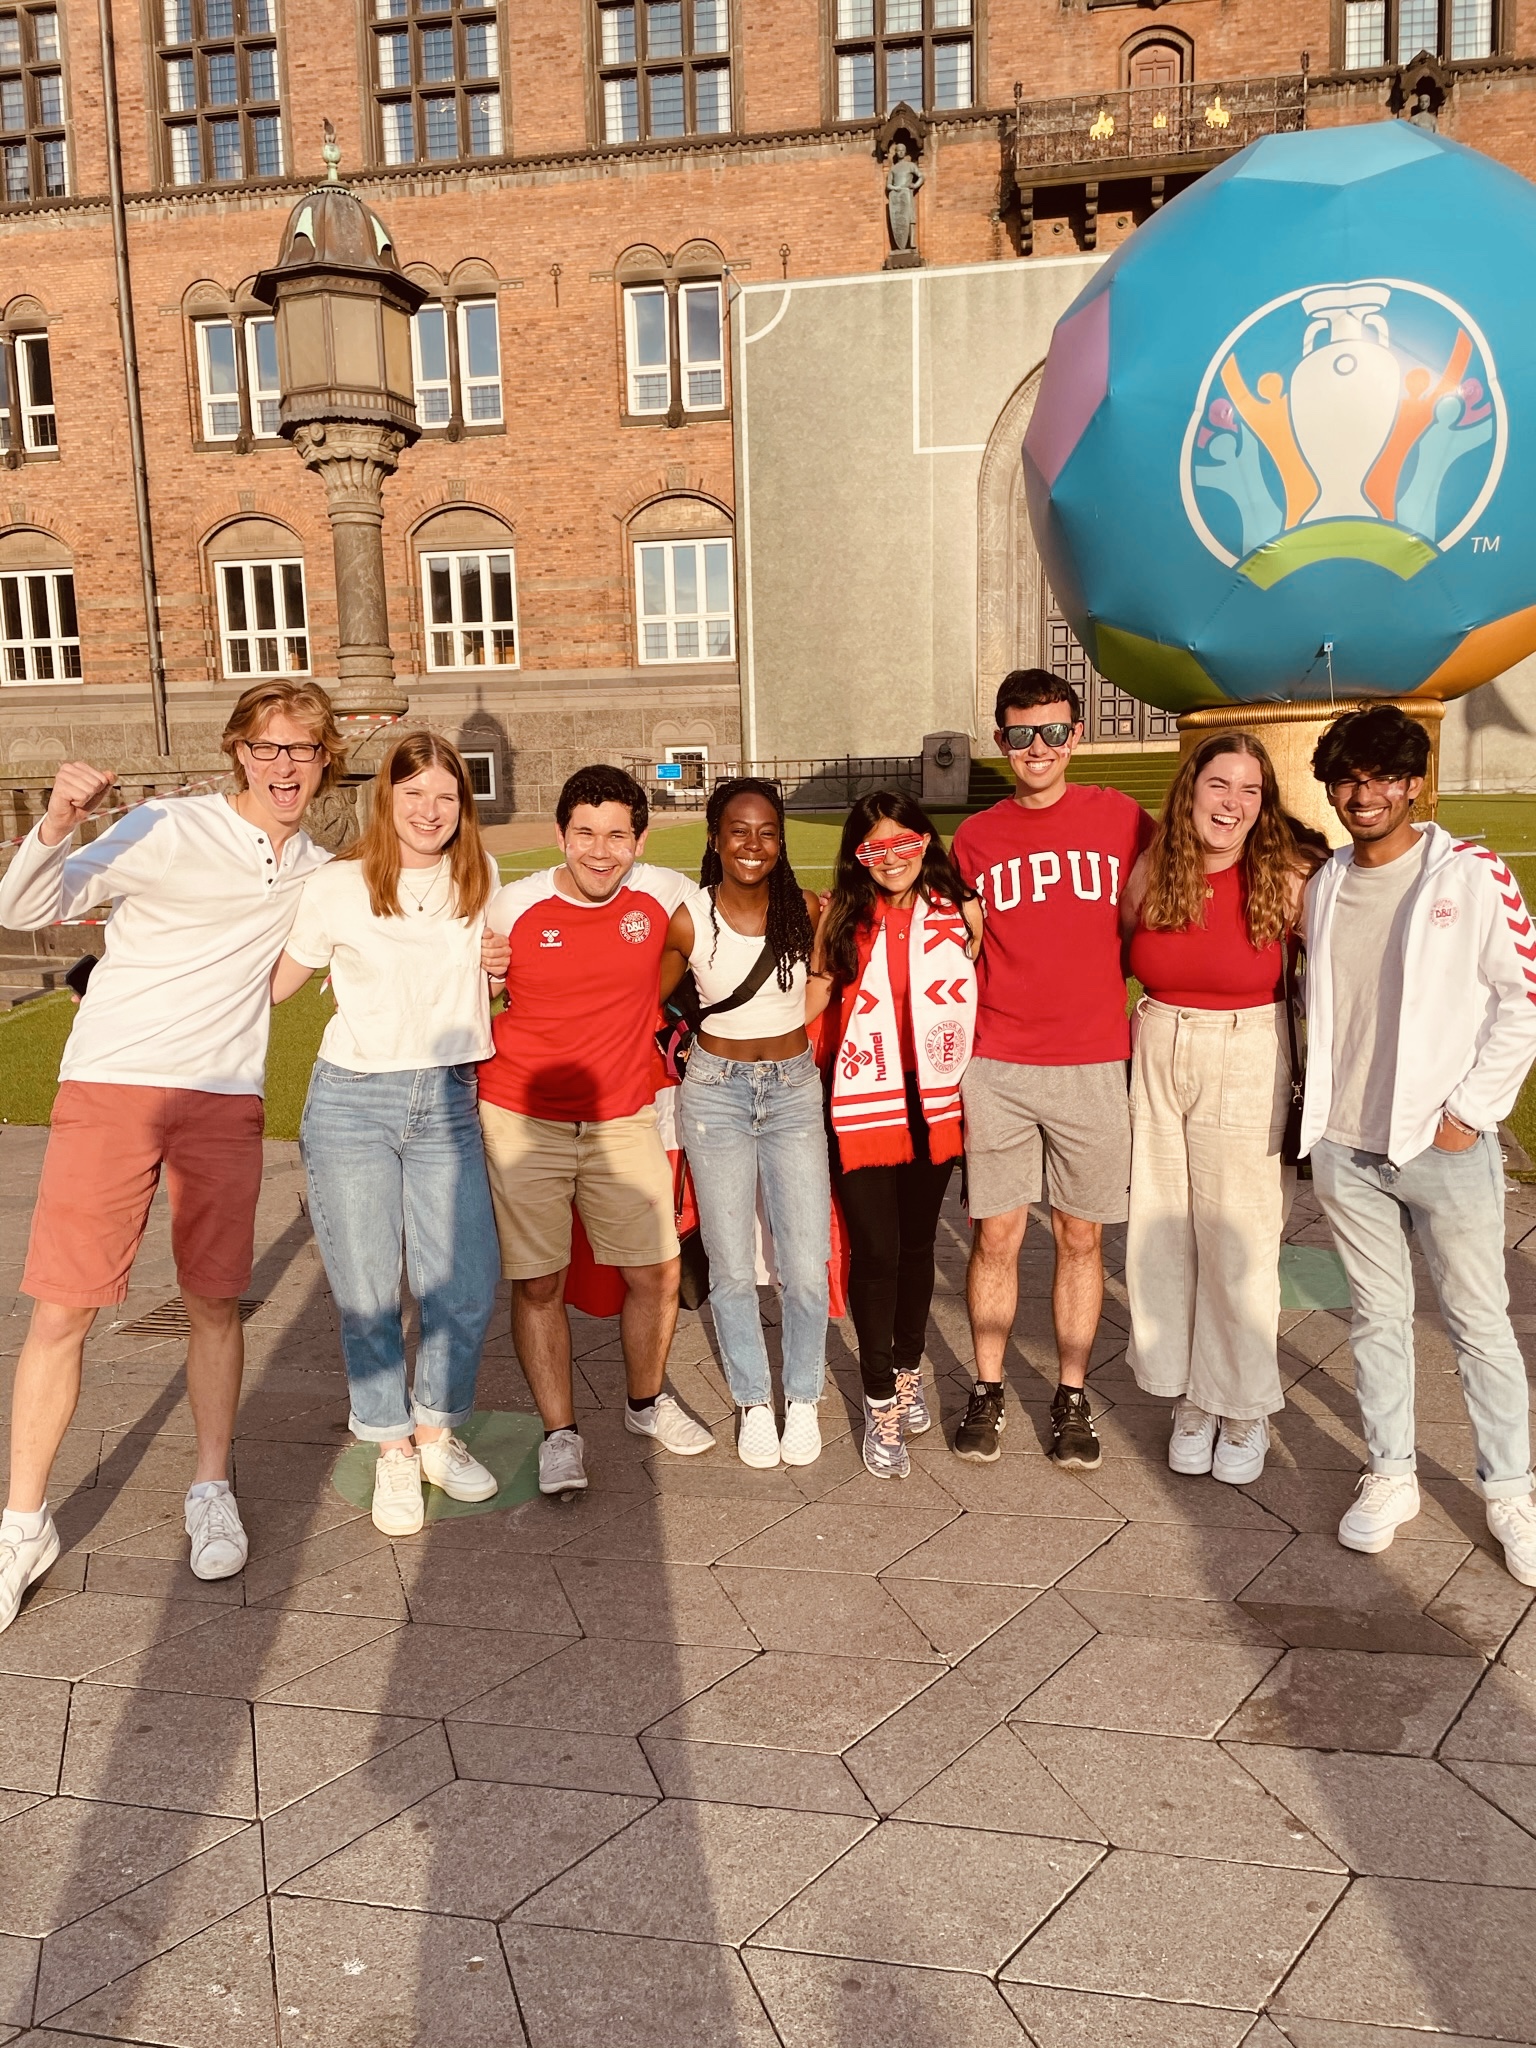 A group of students celebrate in front of a historic building and a giant inflated Euro Cup ball